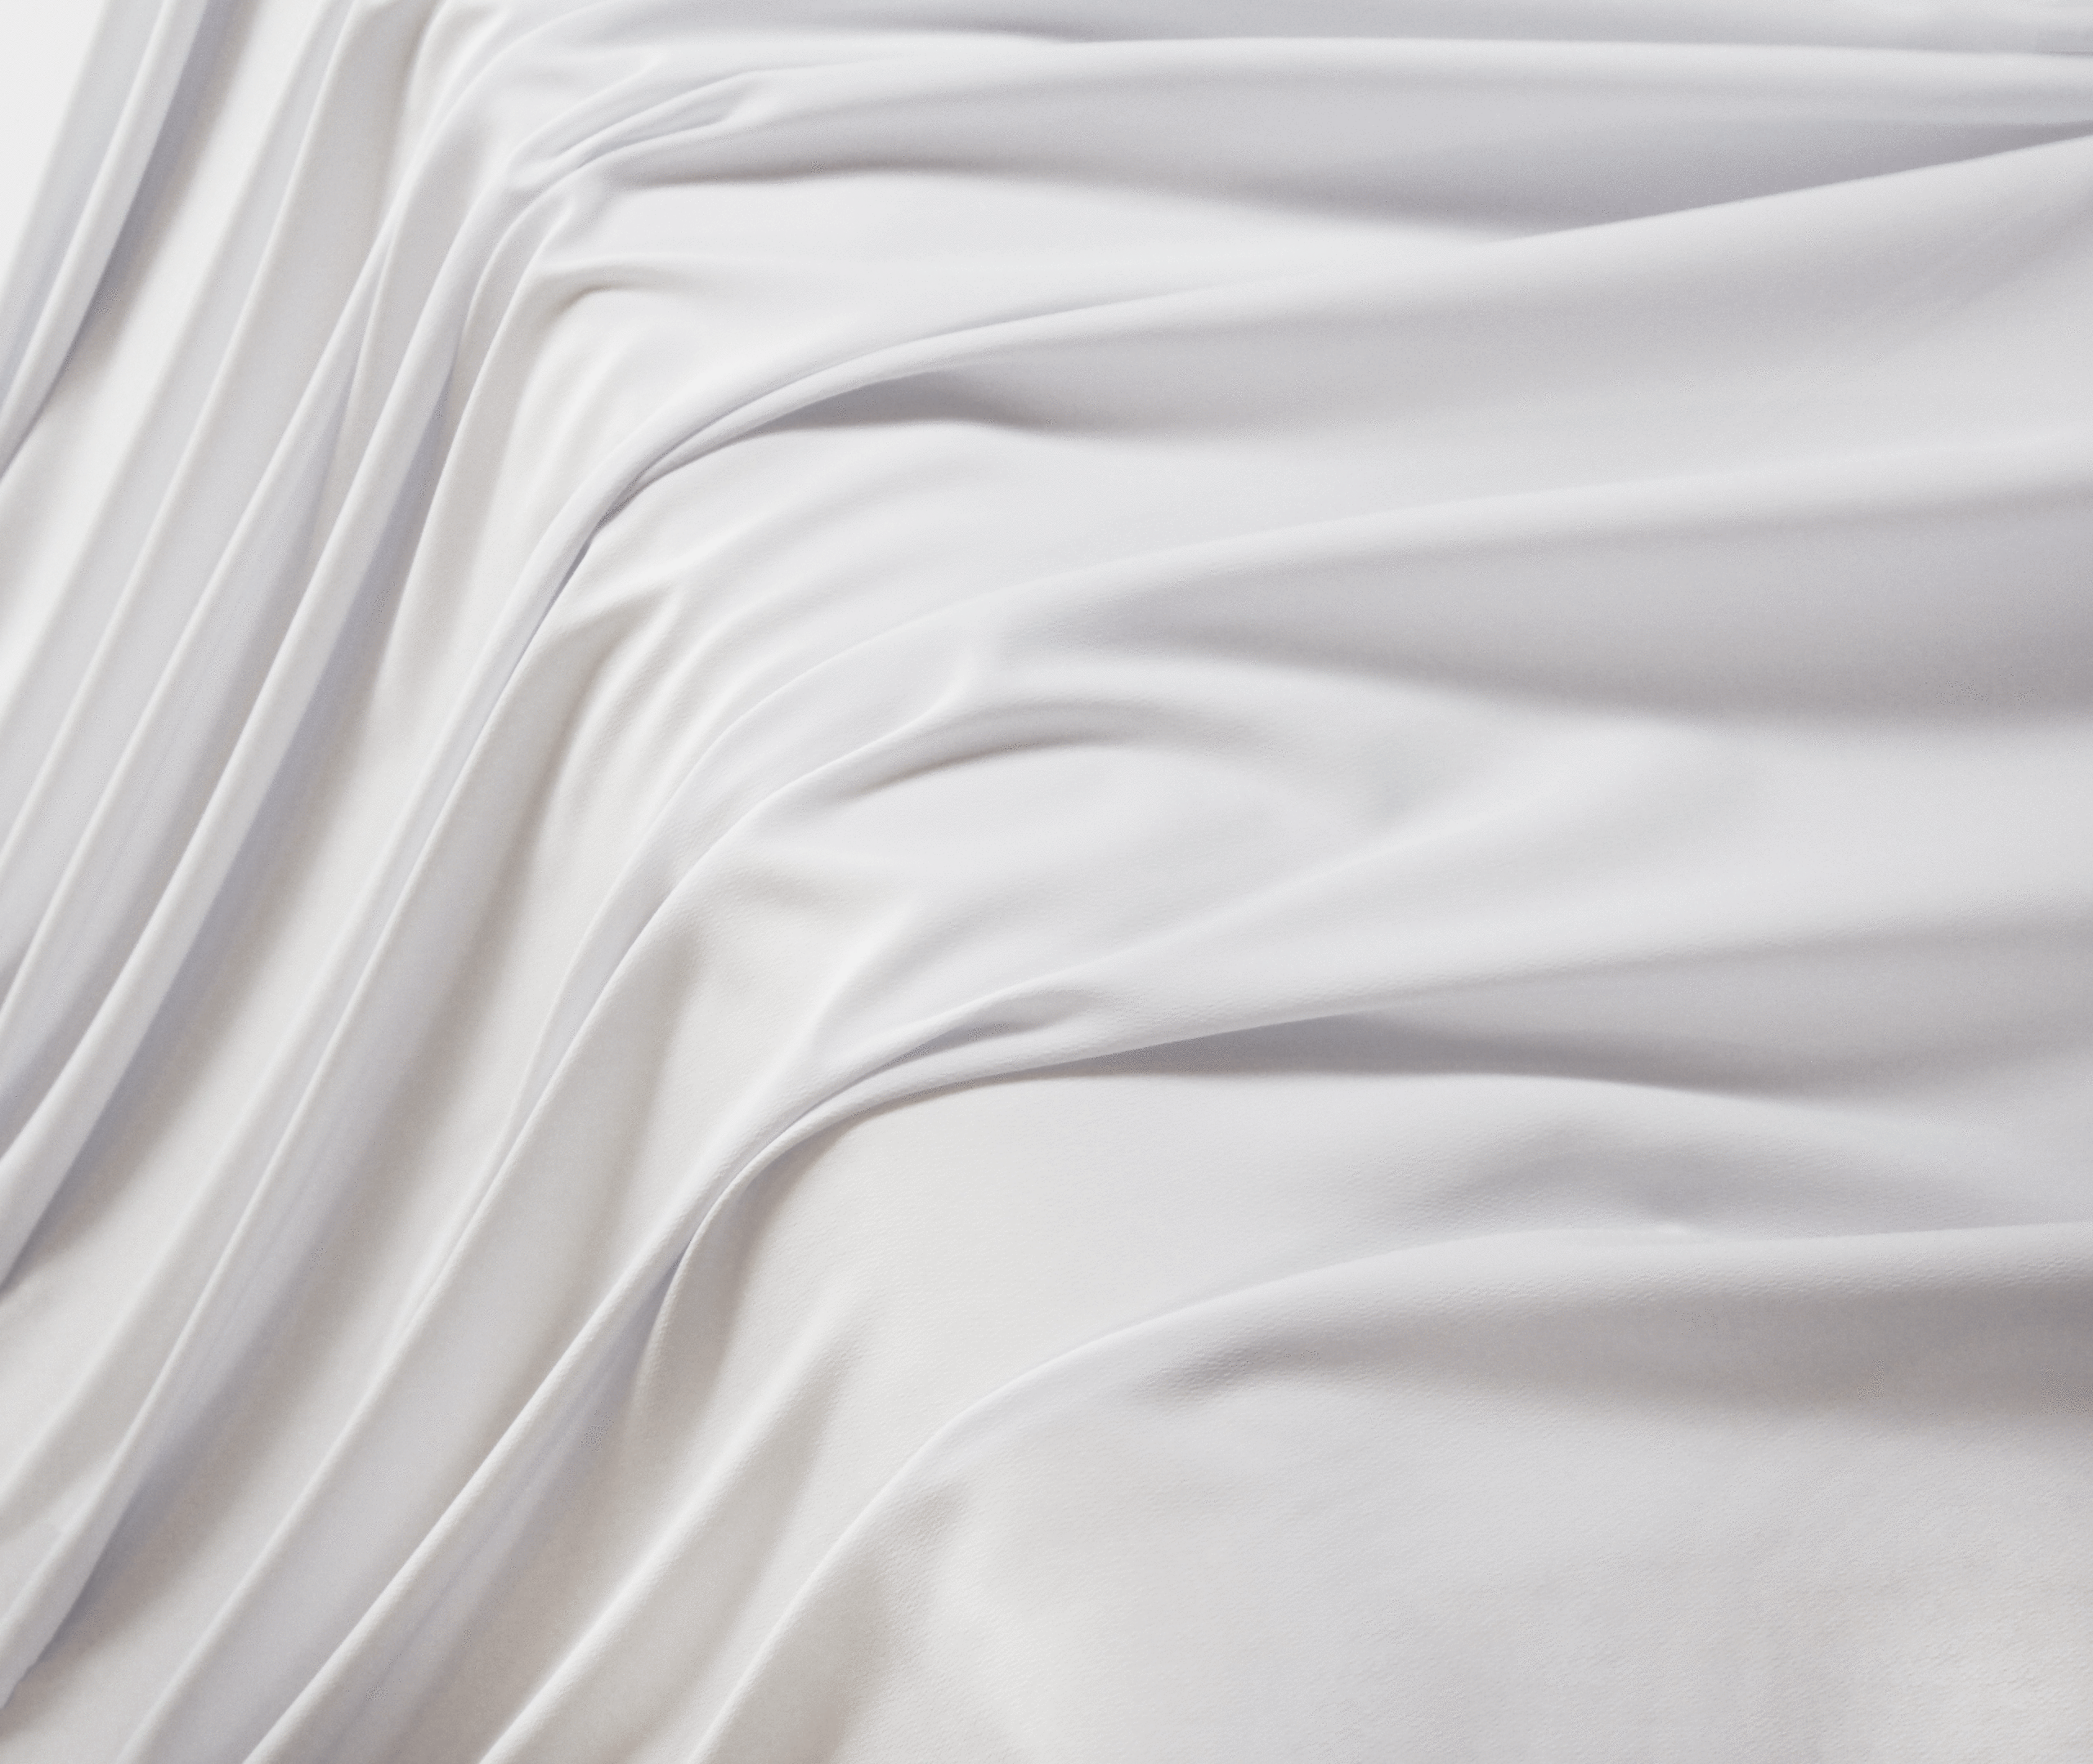 A solid white crepe wool dobby fabric flowing over a table in a waterfall pattern.